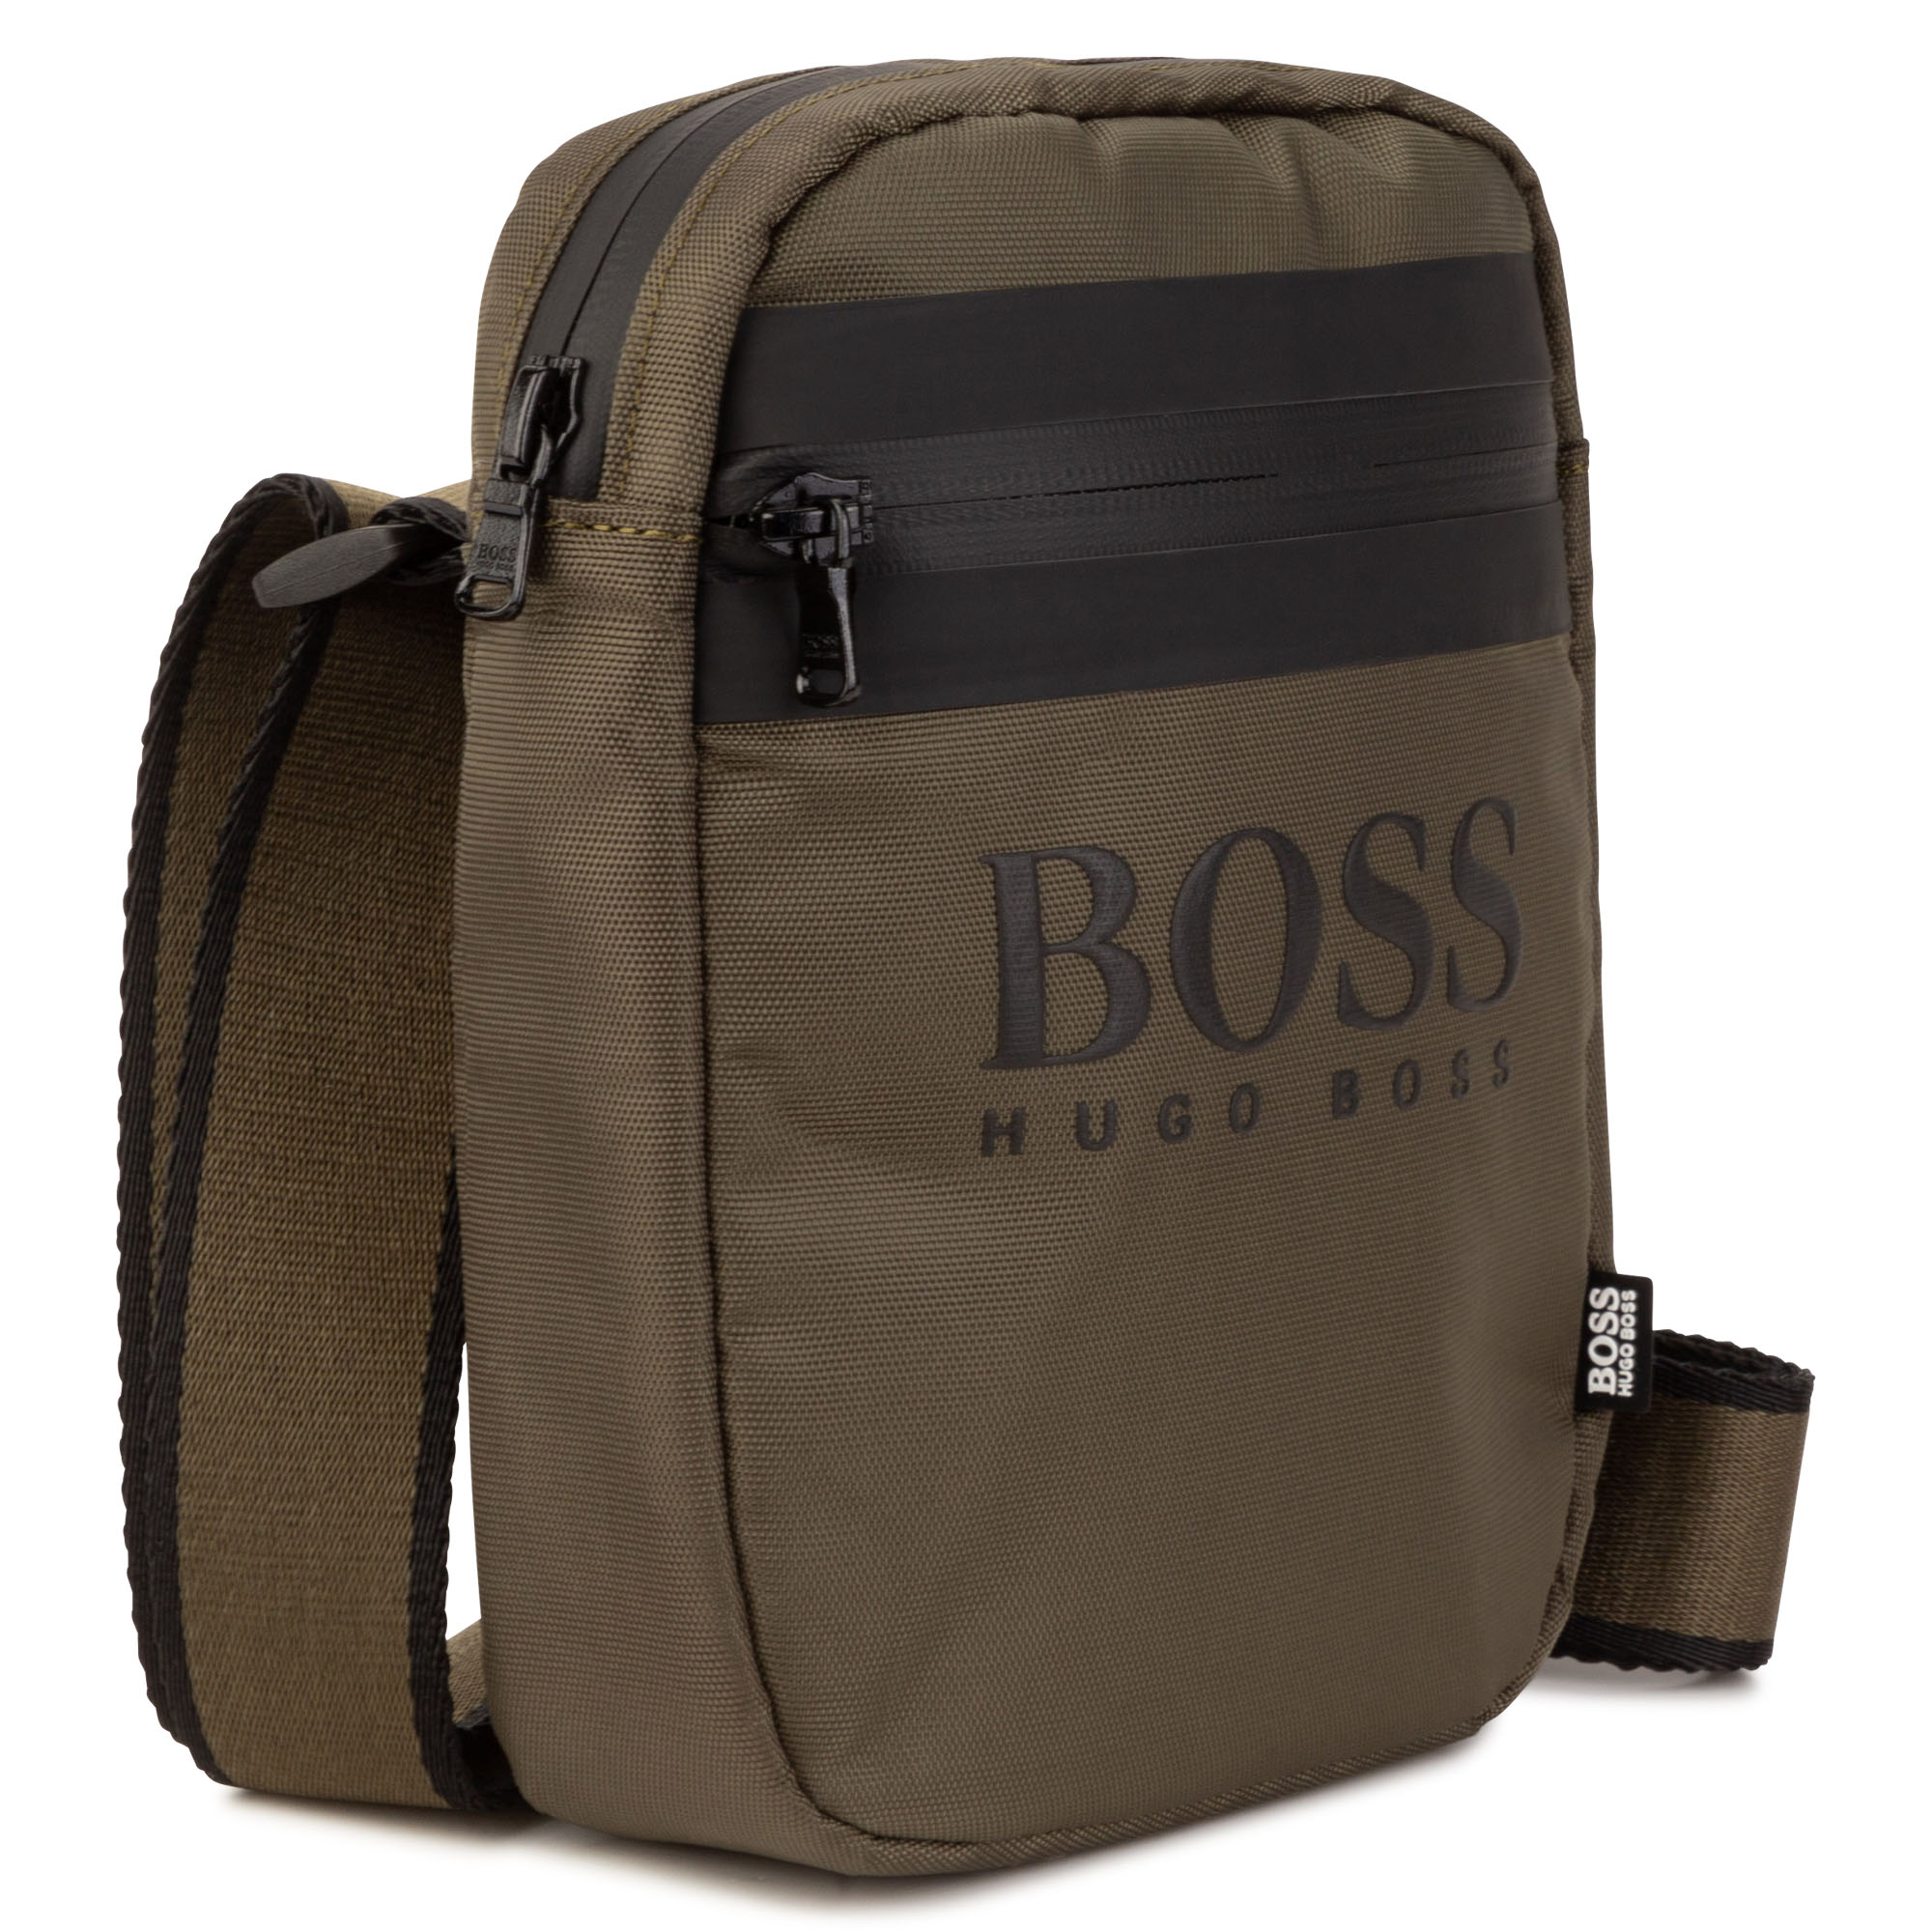 Crossbody bag with adjustable strap BOSS for BOY